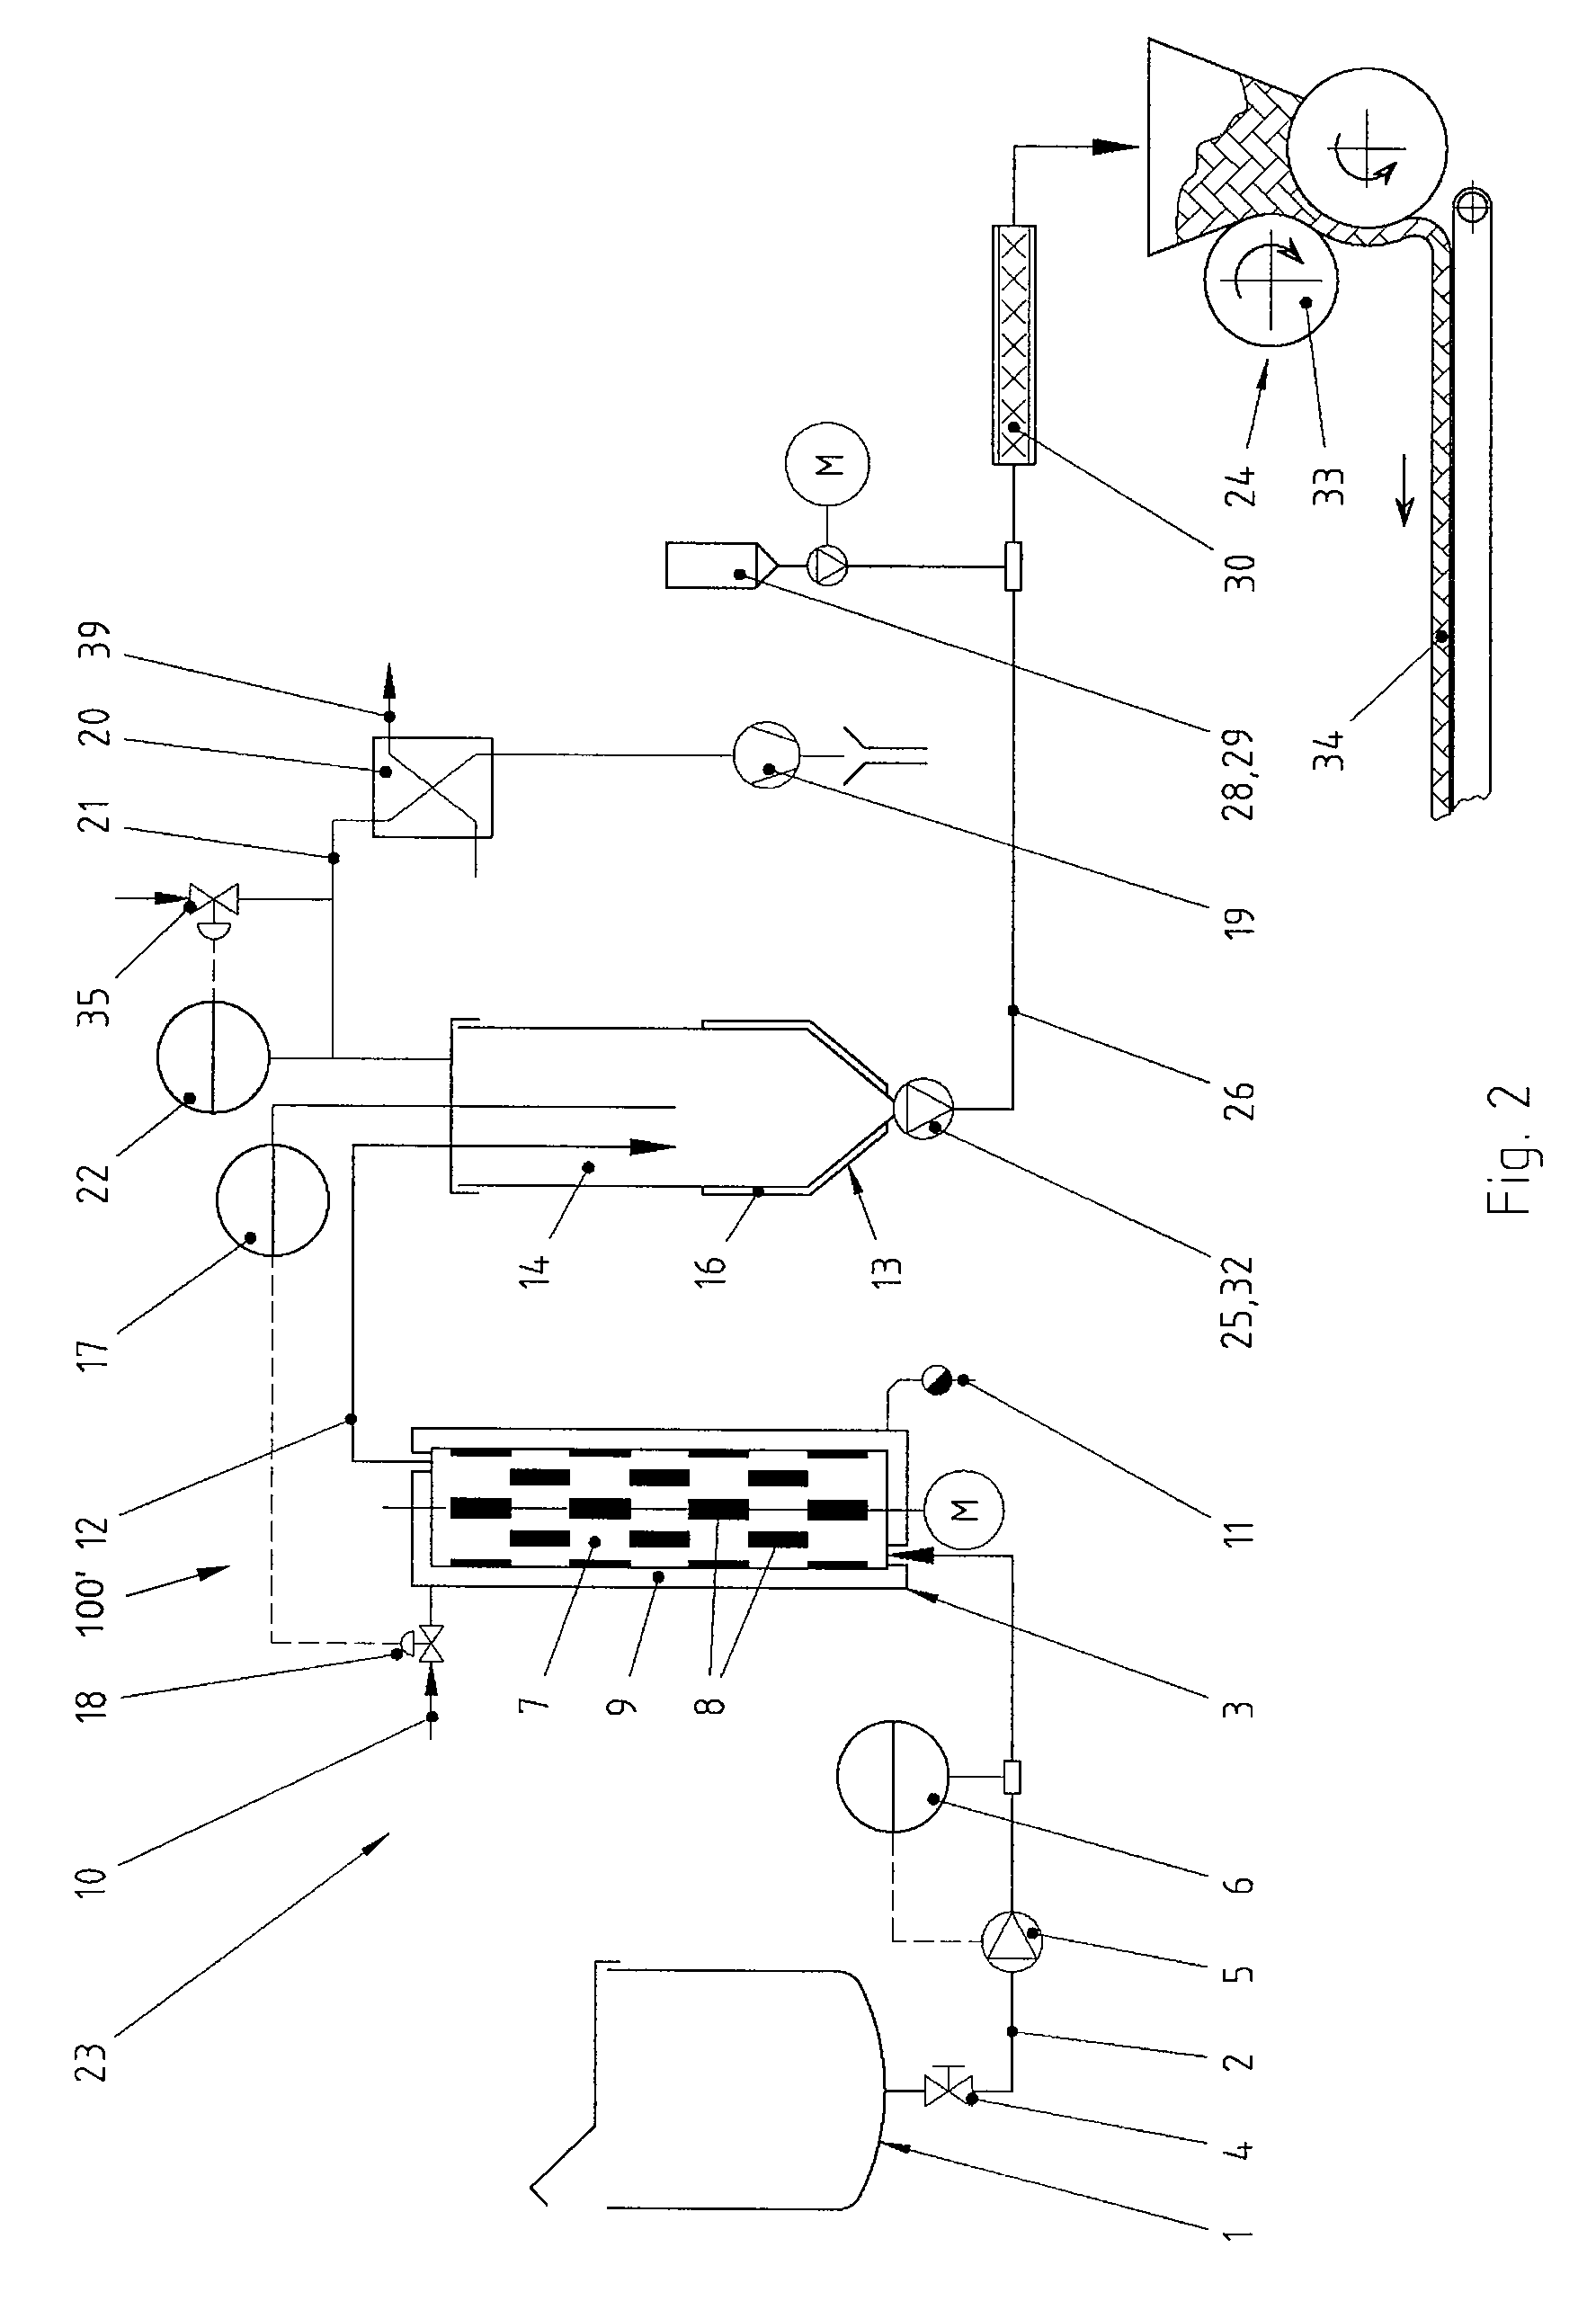 Method and Apparatus for Producing Fruit Leather from a Fruit Mass